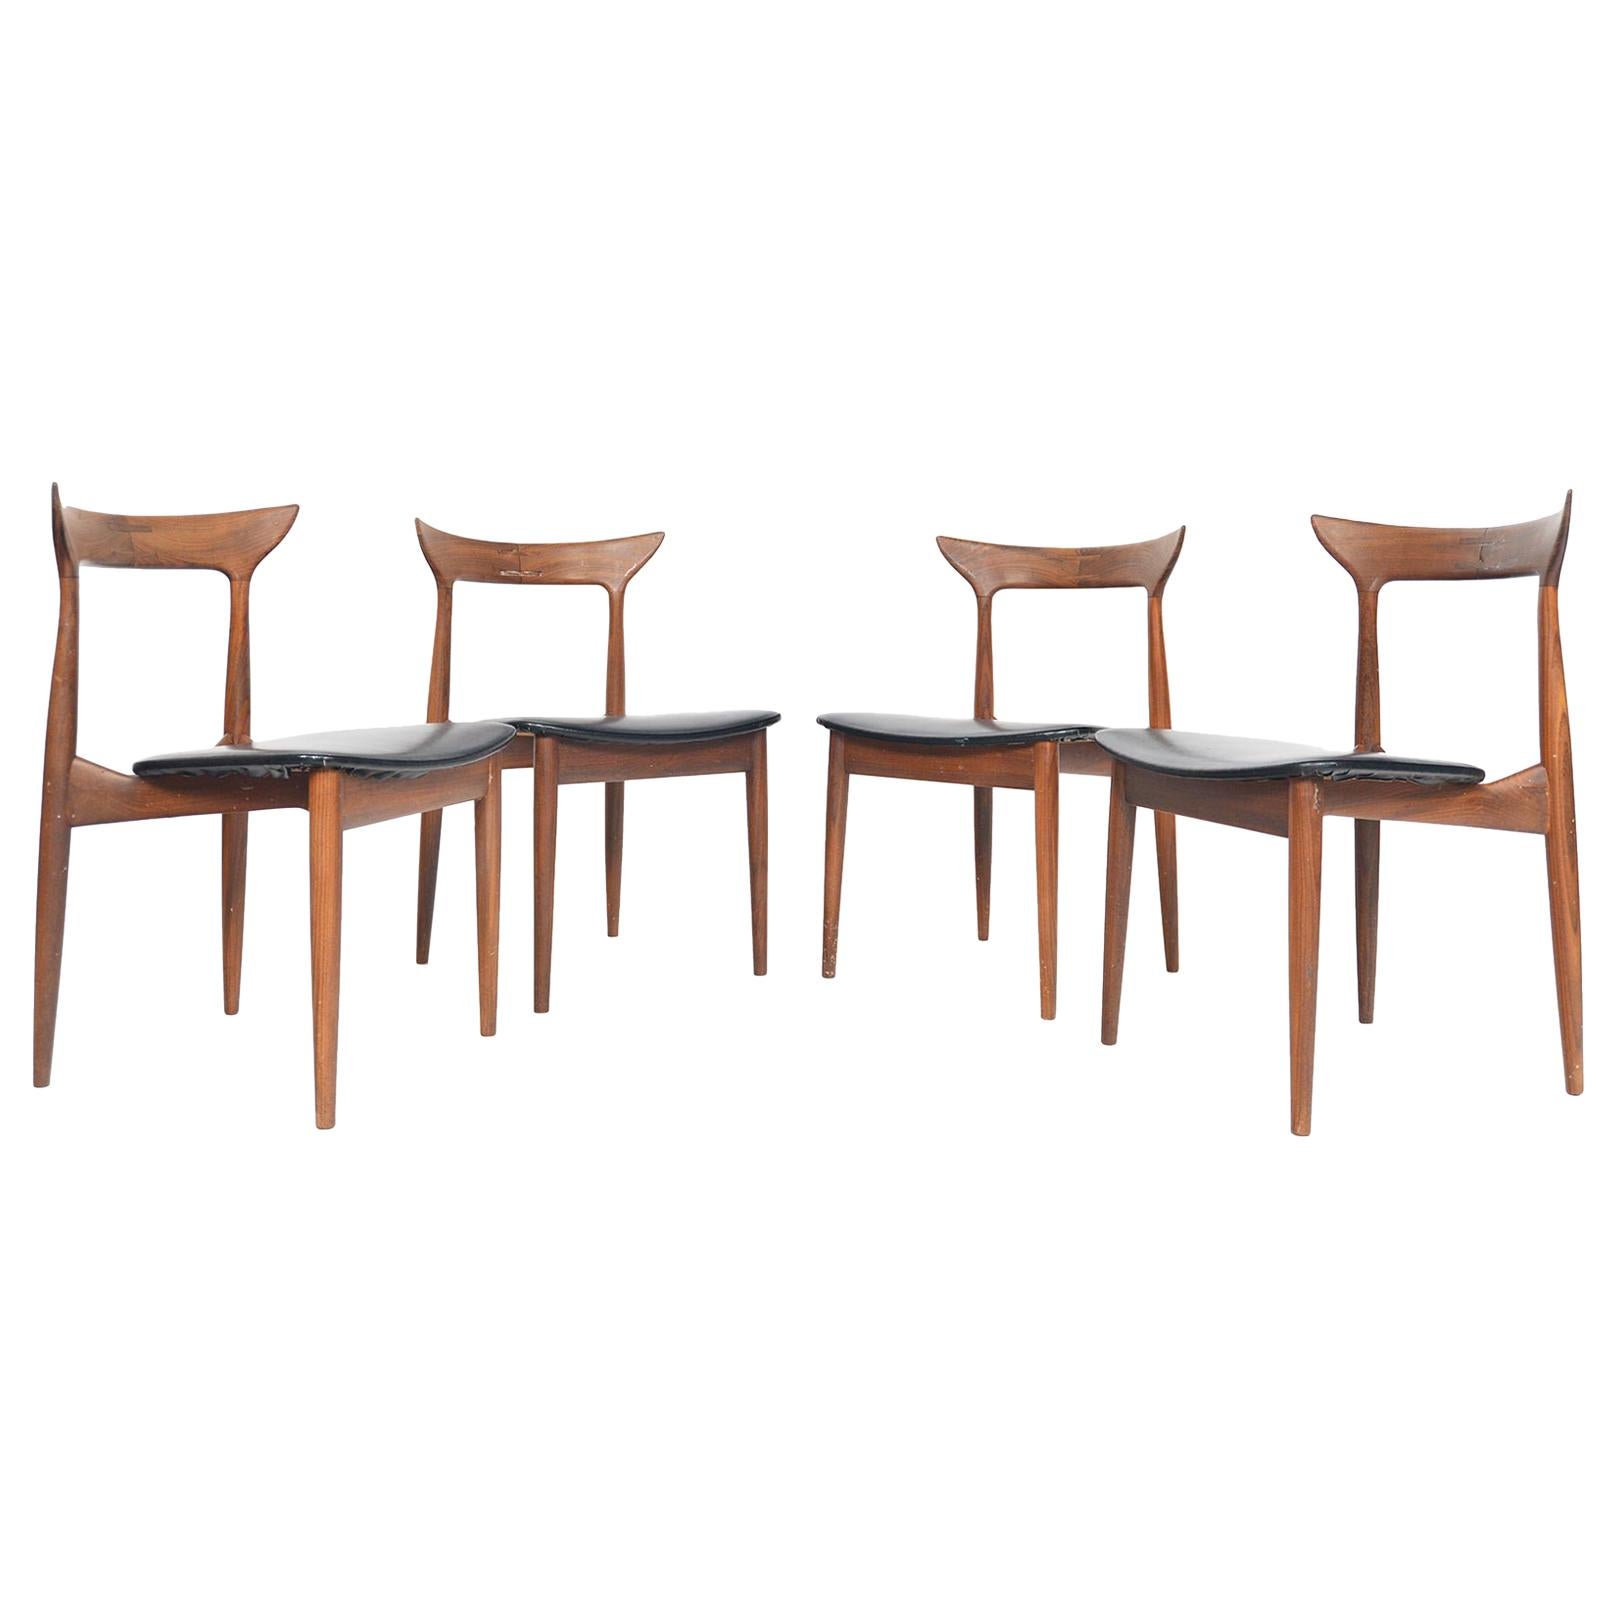 Set of Four Danish Modern Midcentury Dining Chairs in Walnut